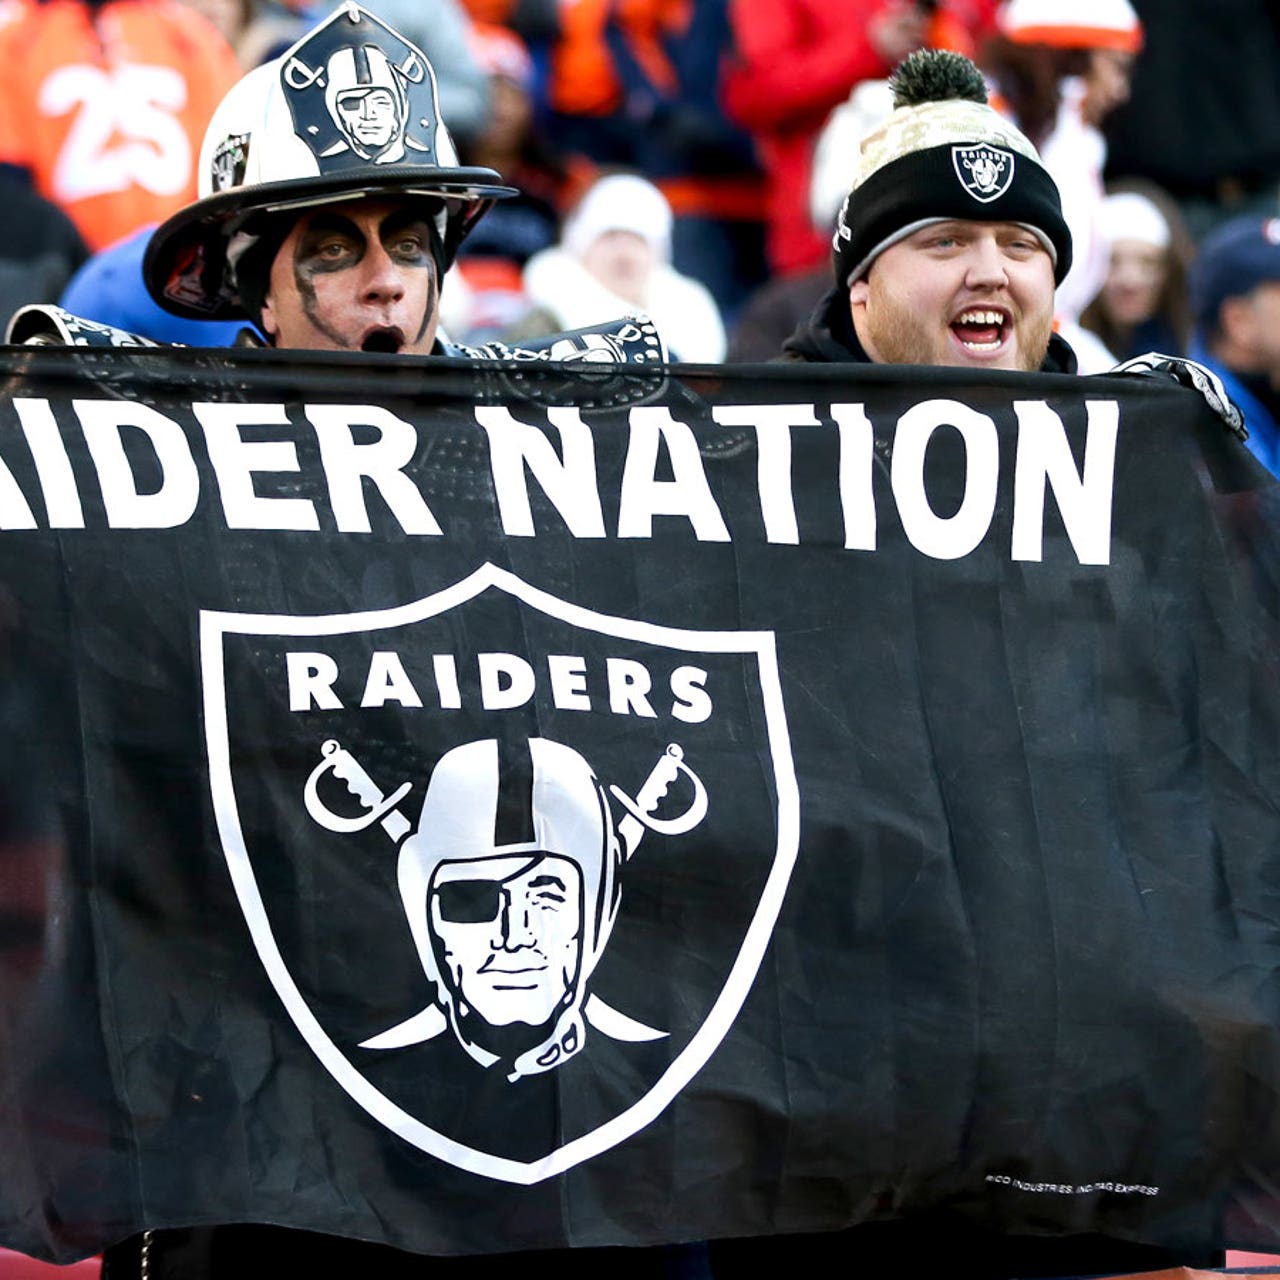 Report: NFL owners had concerns about Raiders and gang culture in LA